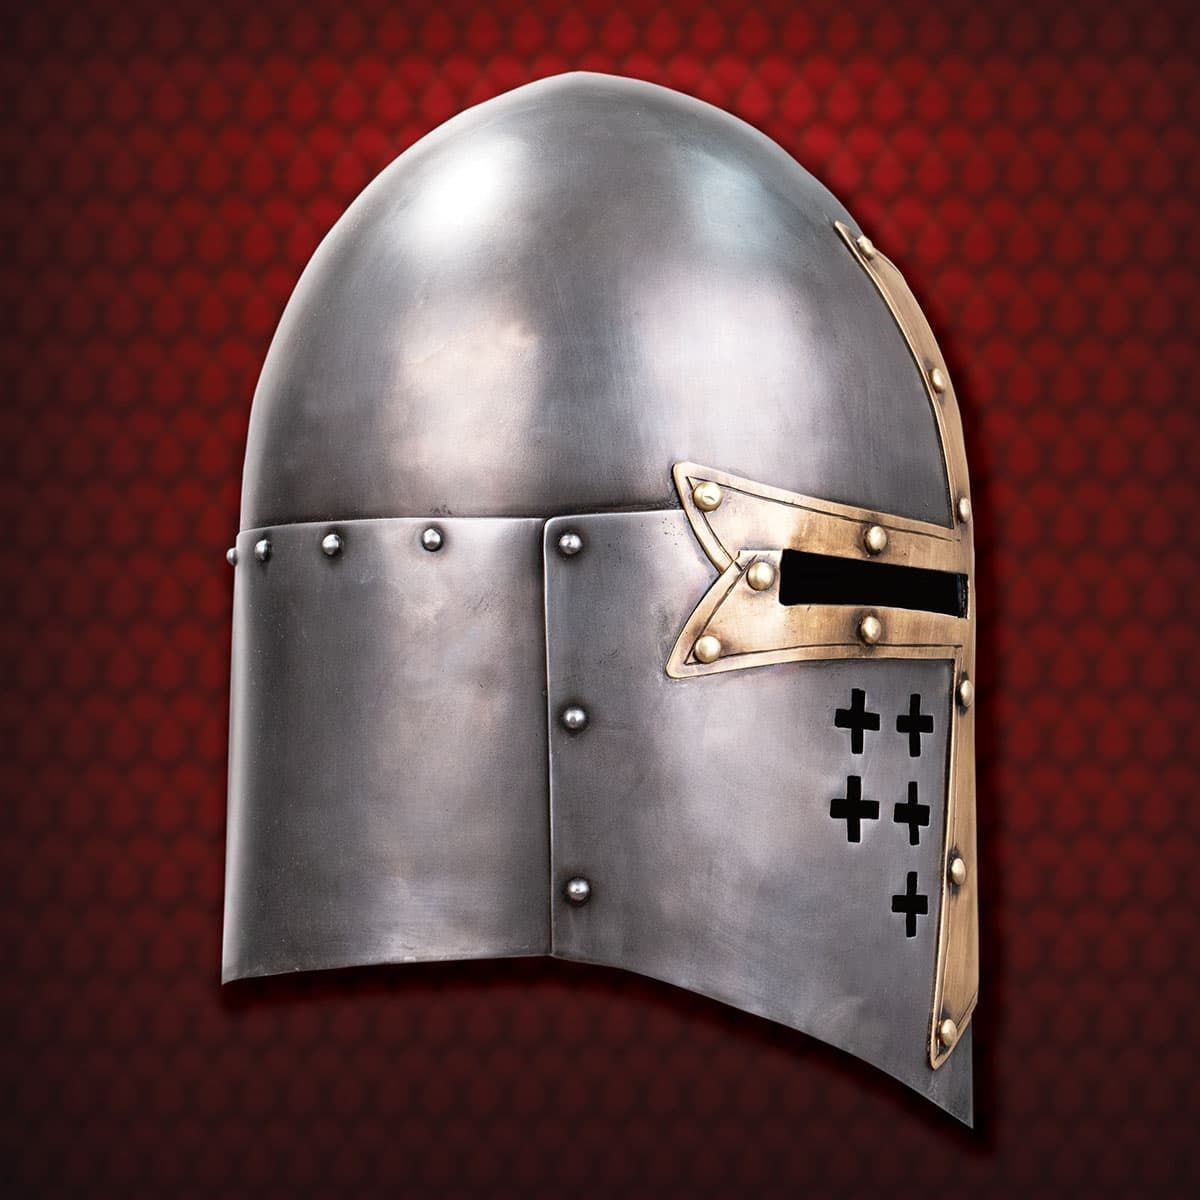 Details about   New saugarloaf armor helmet medieval knight crusader larp/reenactment role play 